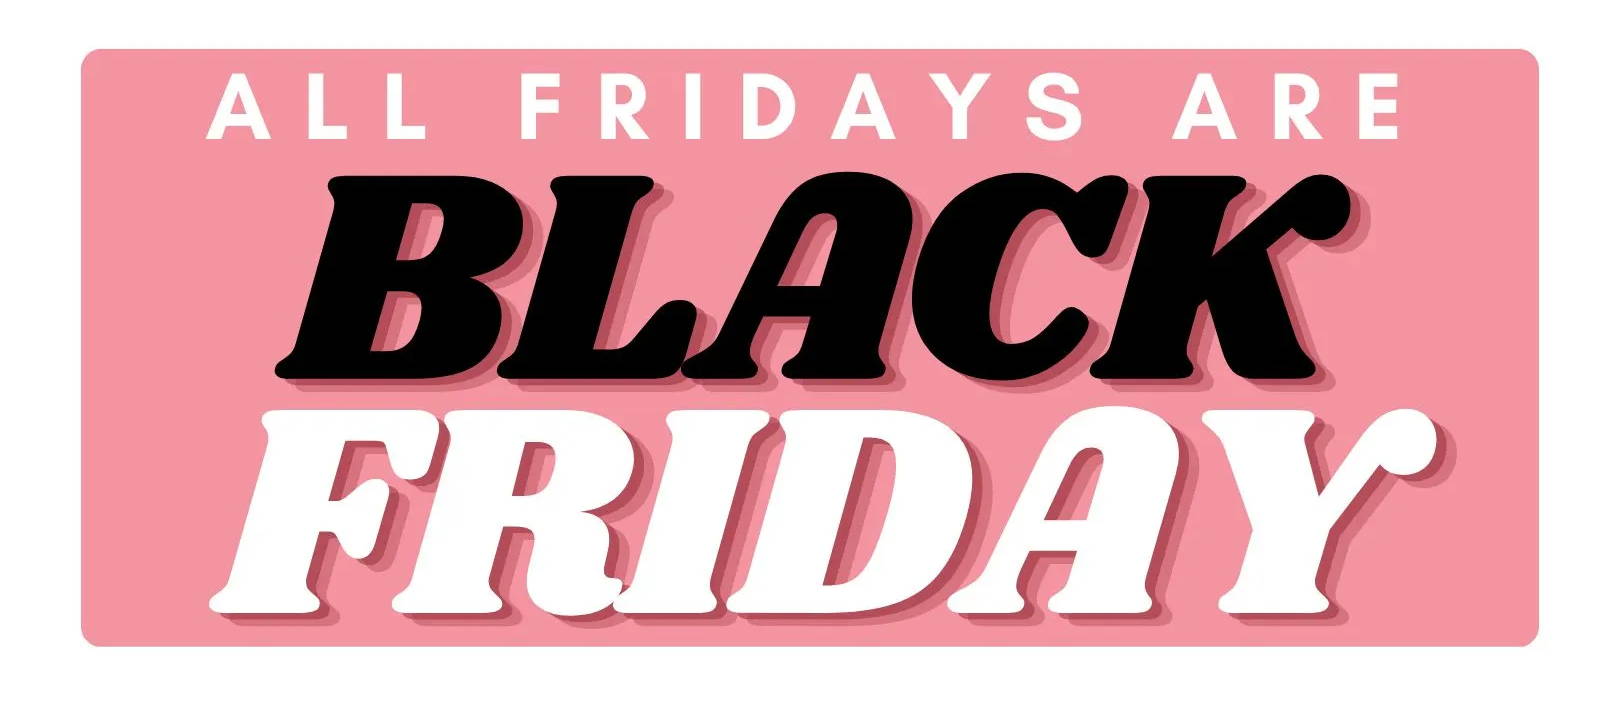 links to november sales. all fridays are black friday.